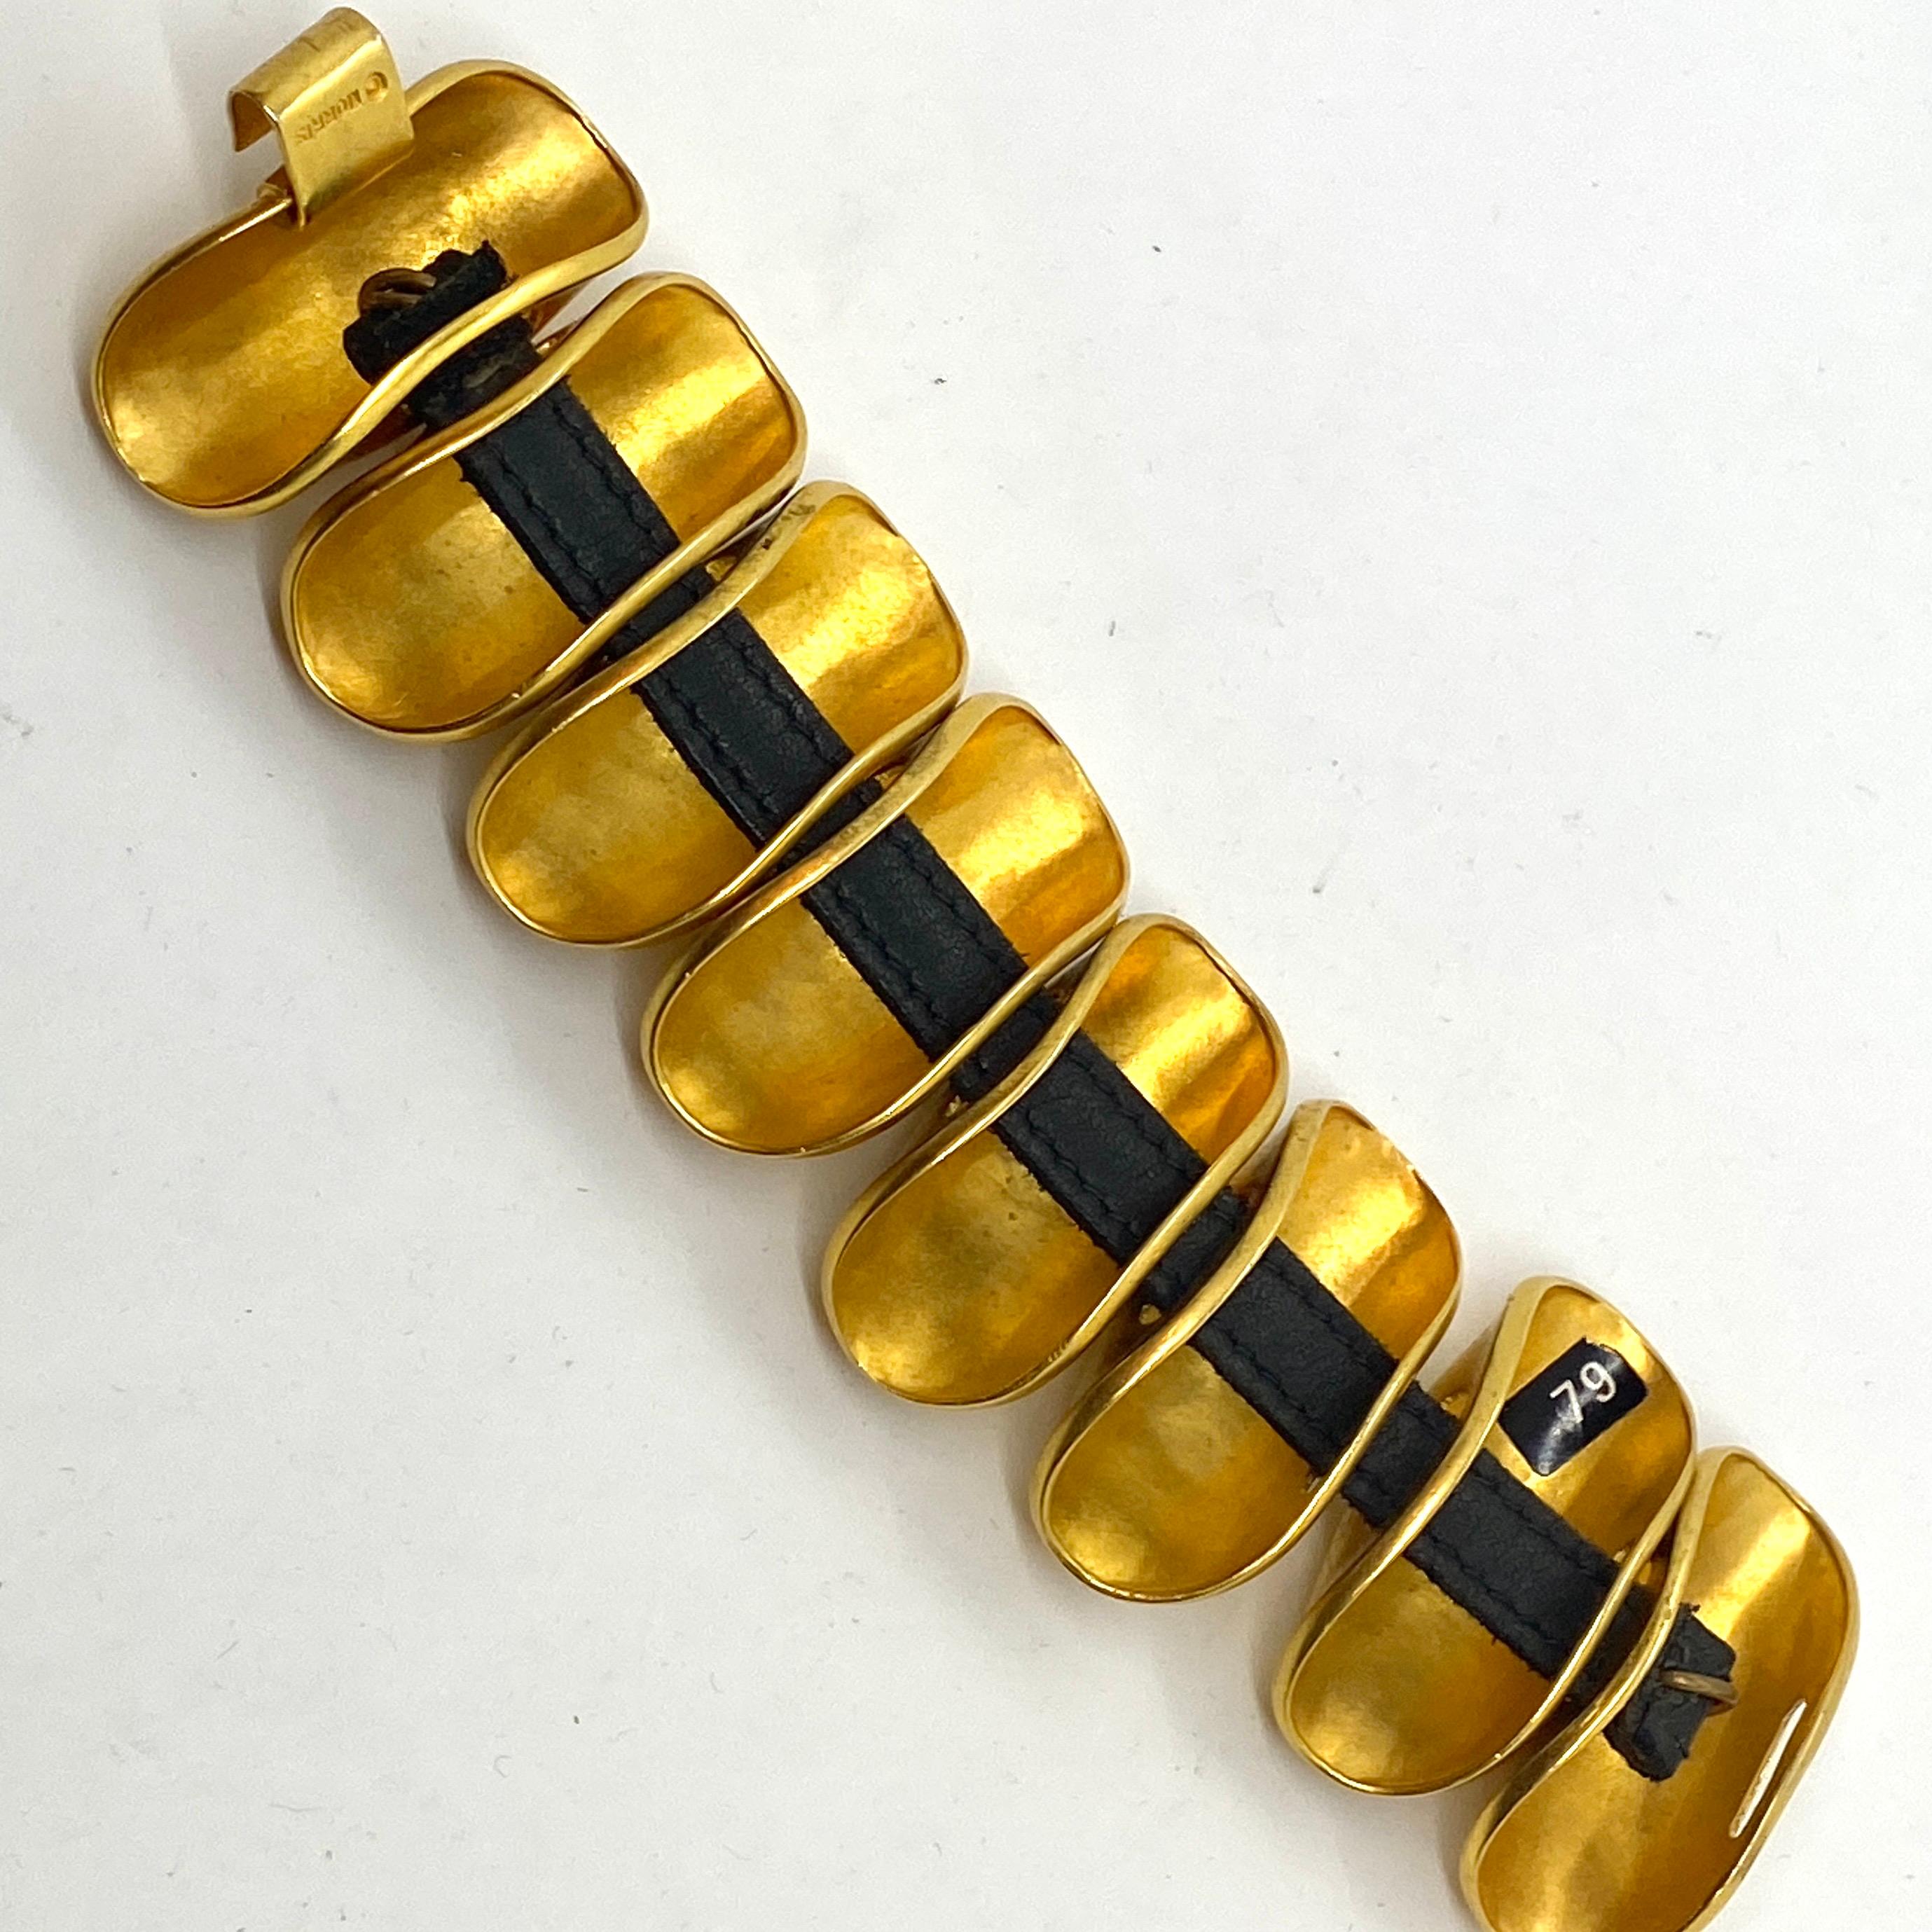 One of the most iconic designs from Robert Lee Morris is this matte gold plated brass bracelet with 8 large knuckle ring slides on a leather strap. the clasp is quite primitive and fits with the gutsy design of this piece. there is spontaneous joy